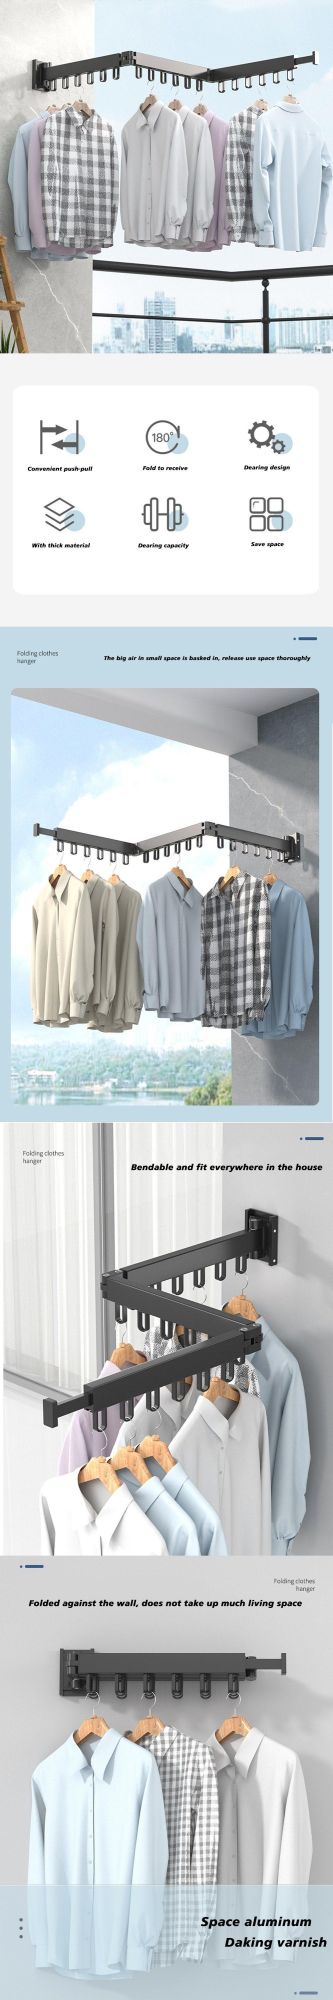 Folding Clothes Hanger Wall Mount Retractable Cloth Drying Rack Space Saving Aluminum Home Laundry Clothesline Washing Lines